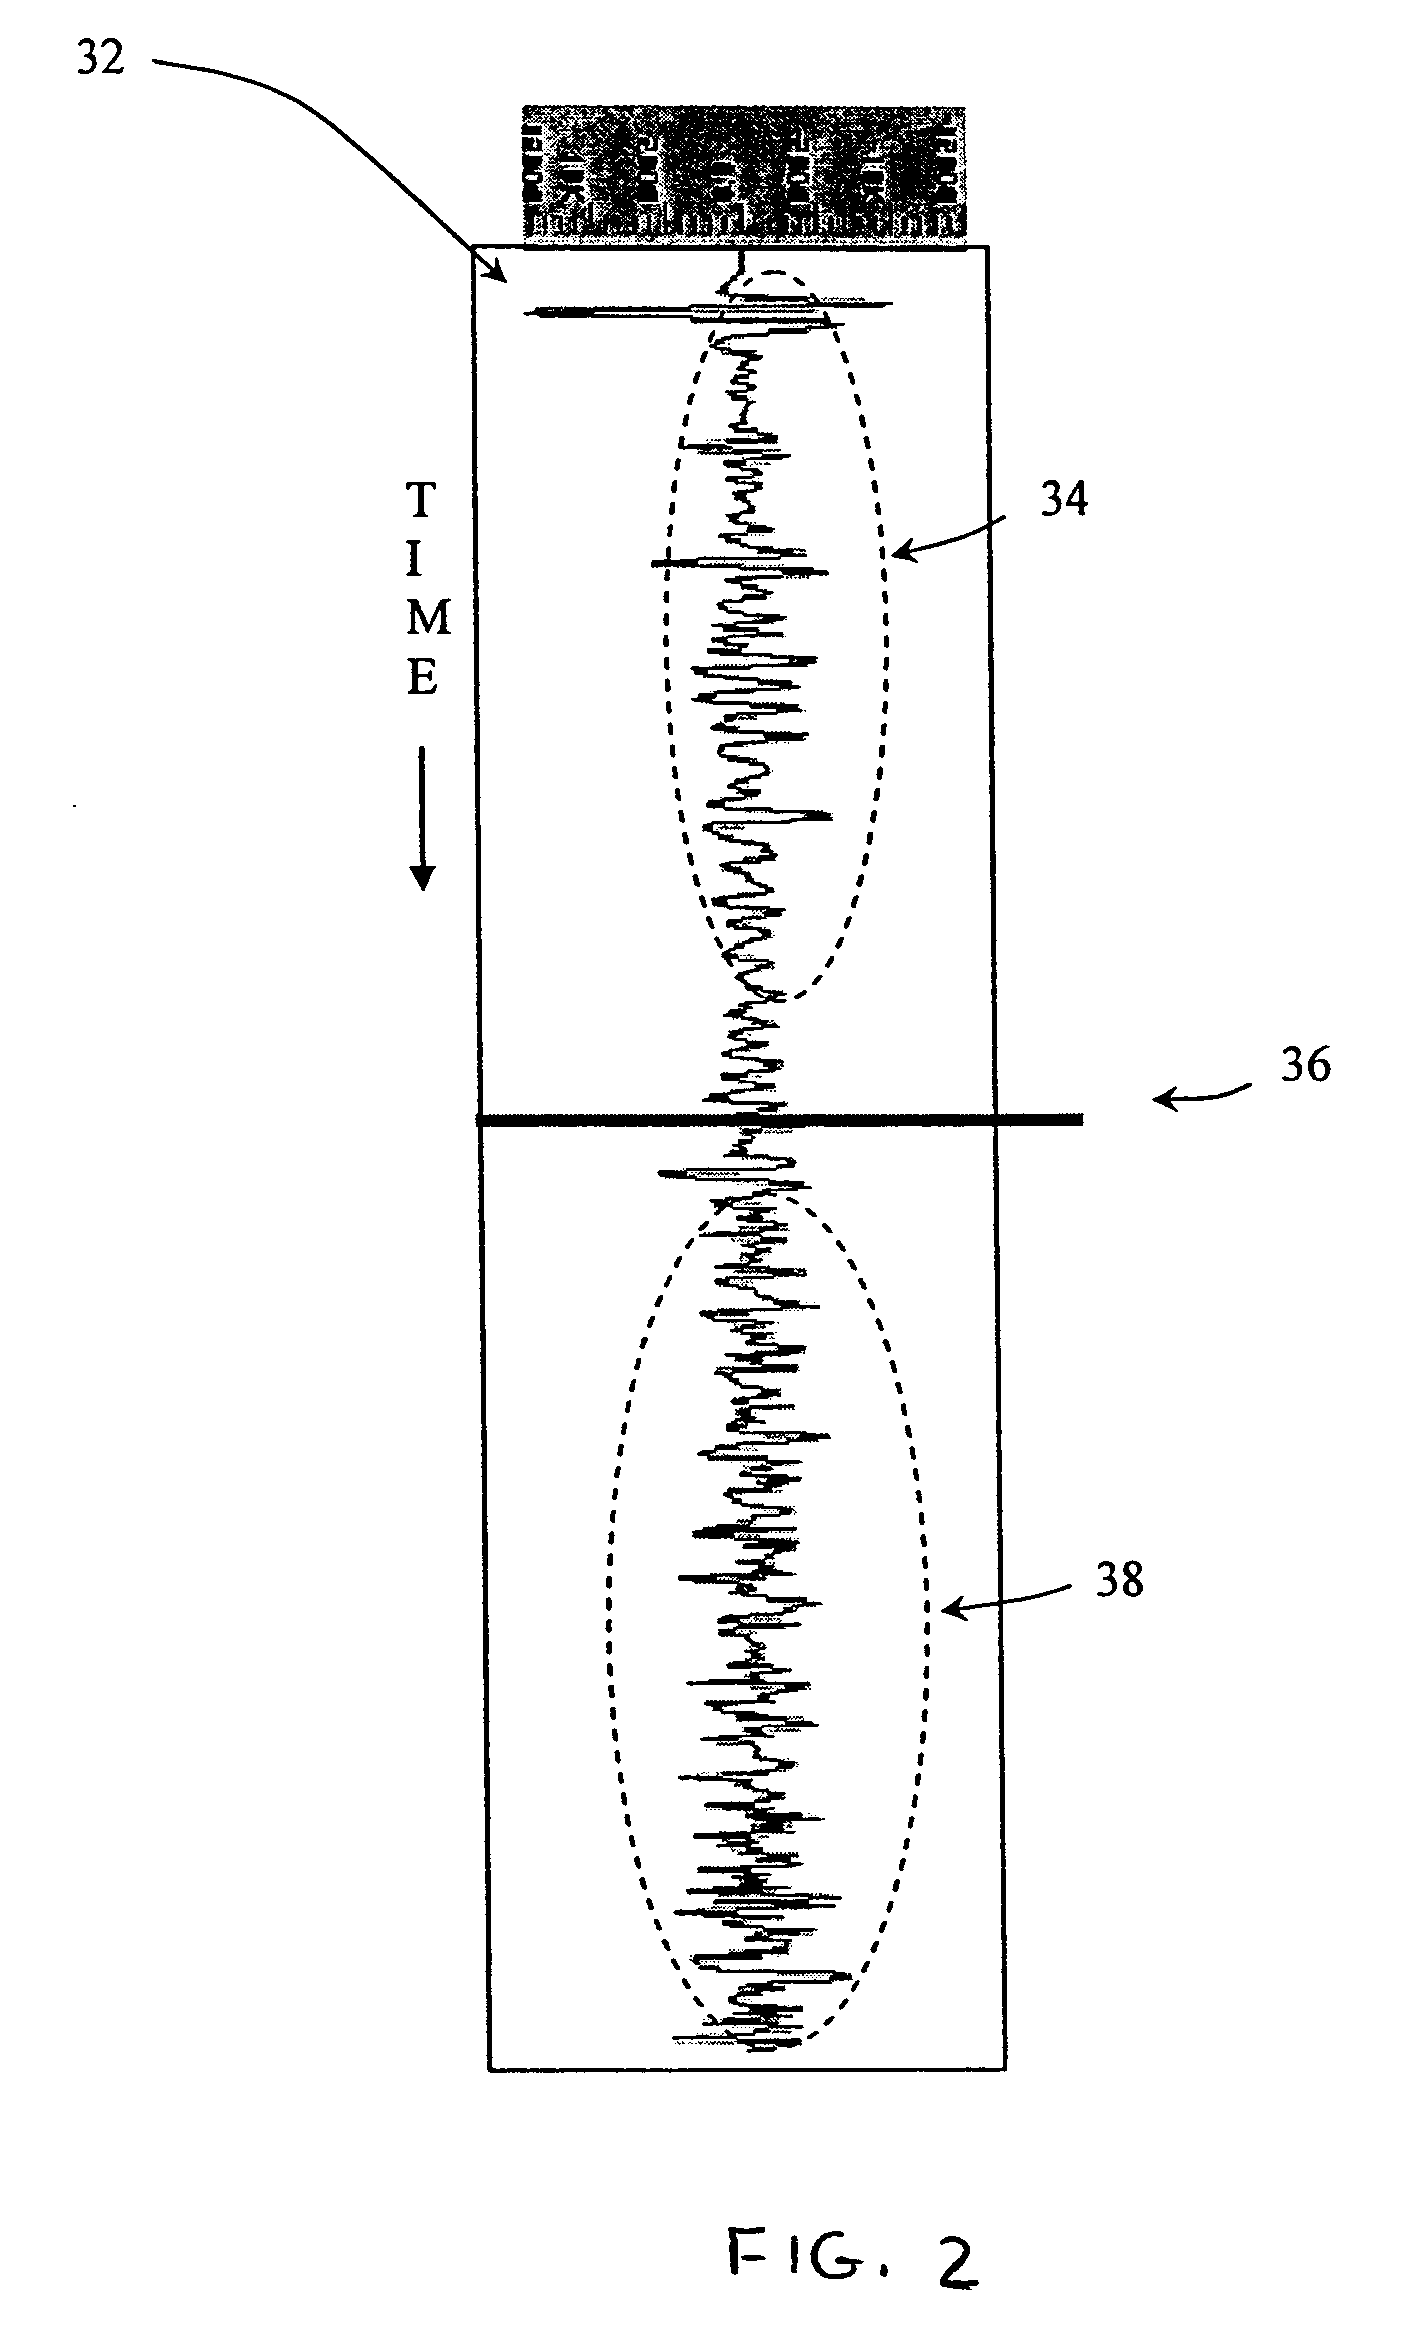 System and methods for obtaining ground conductivity information using GPR data